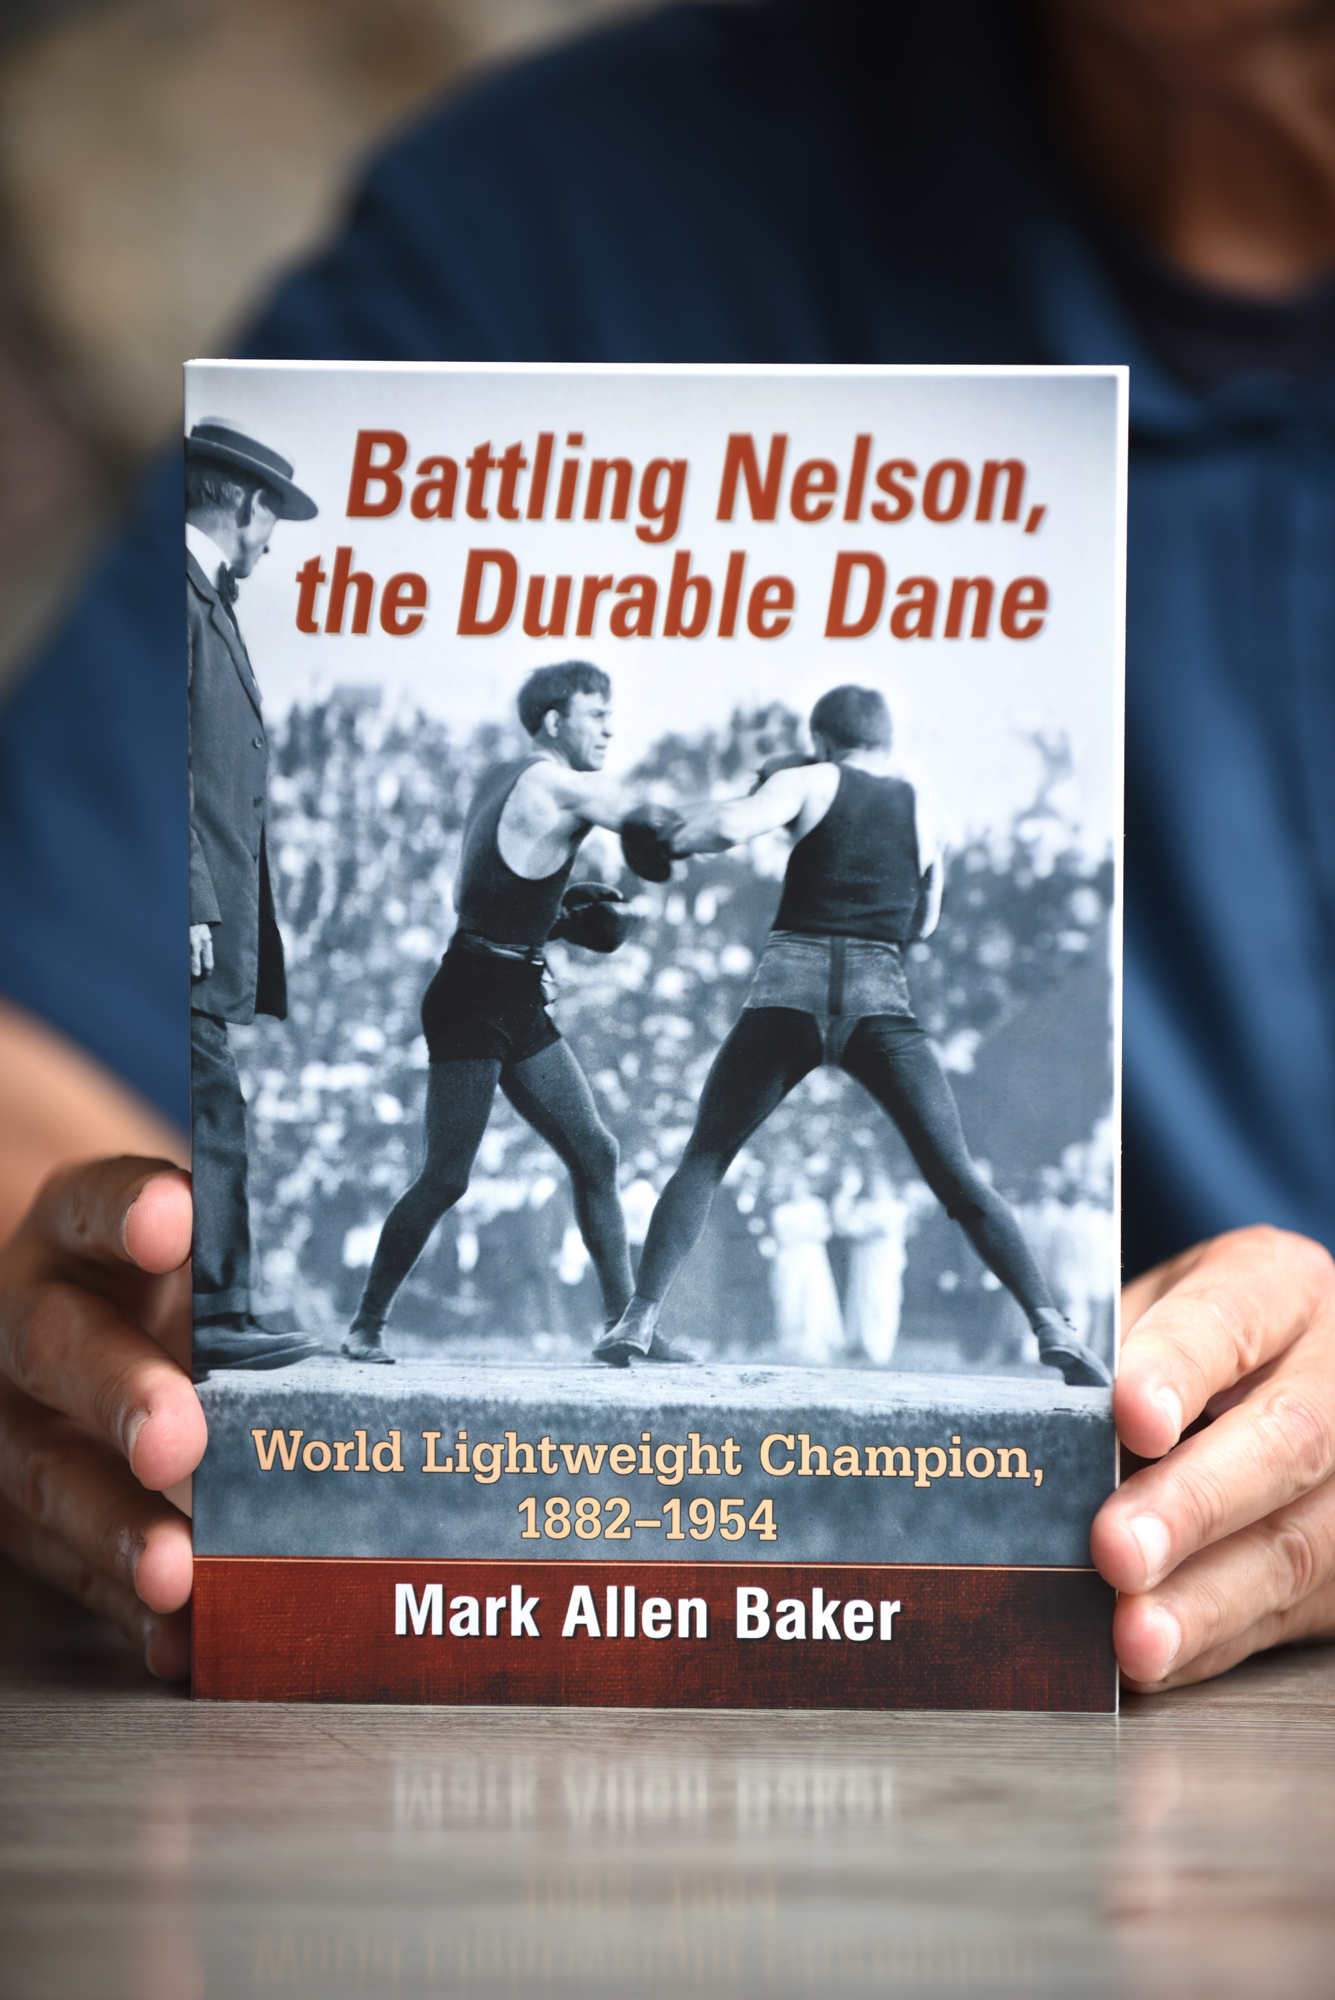 Baker’s 2016 biography of turn-of-the-century fighter Oscar “Battling” Matthew Nelson was so fascinating that it garnered the attention of a screenwriter.